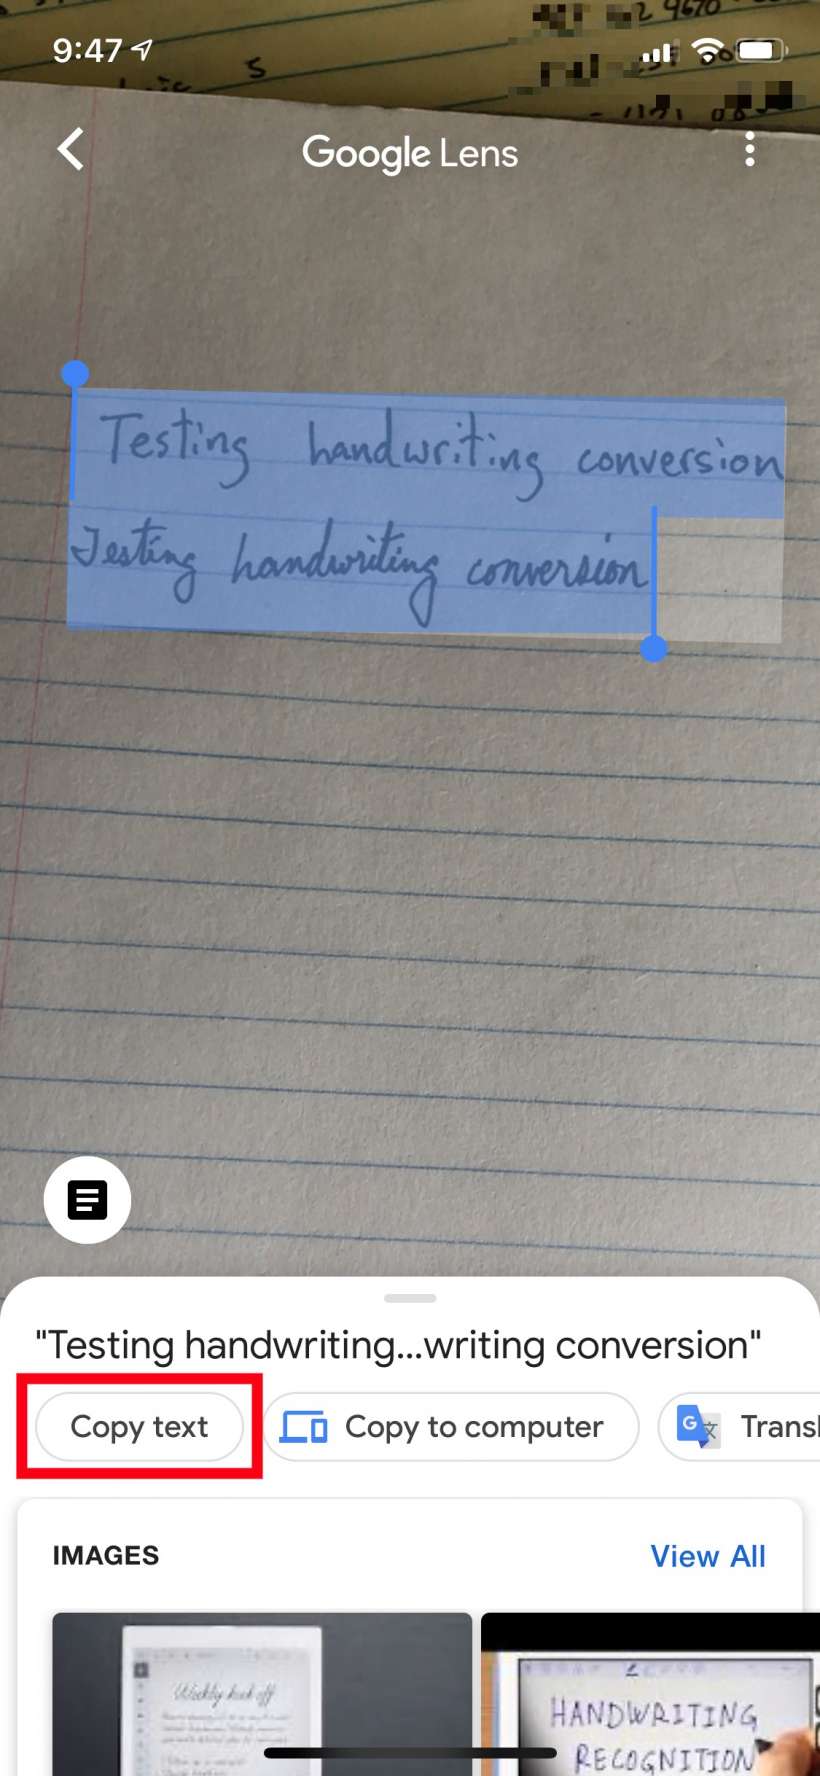 How to convert handwriting to text on iPhone and iPad using Google Lens OCR.